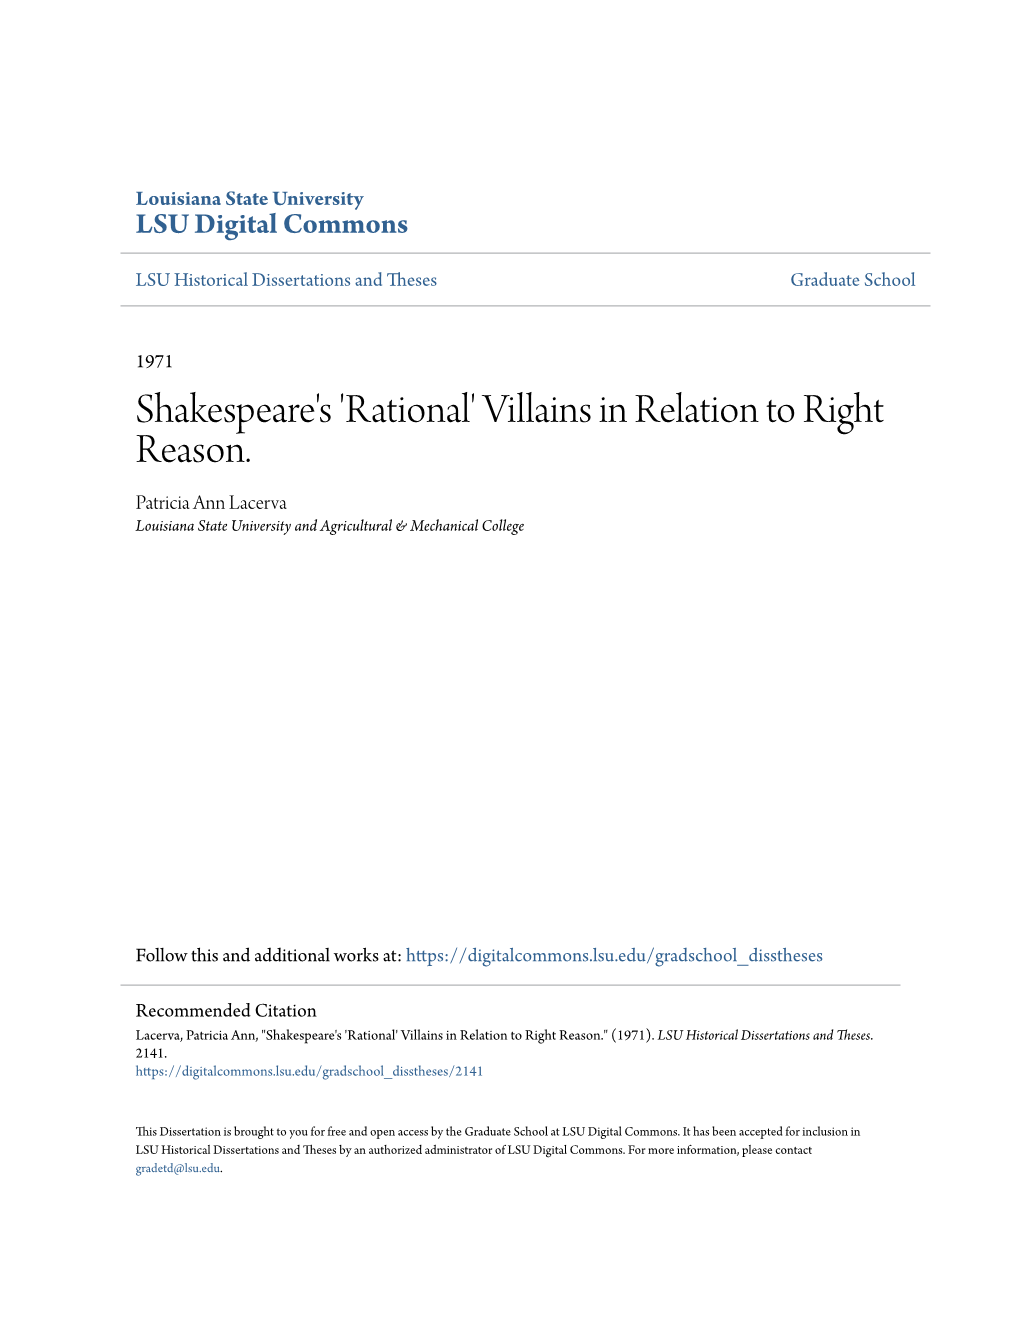 Shakespeare's 'Rational' Villains in Relation to Right Reason